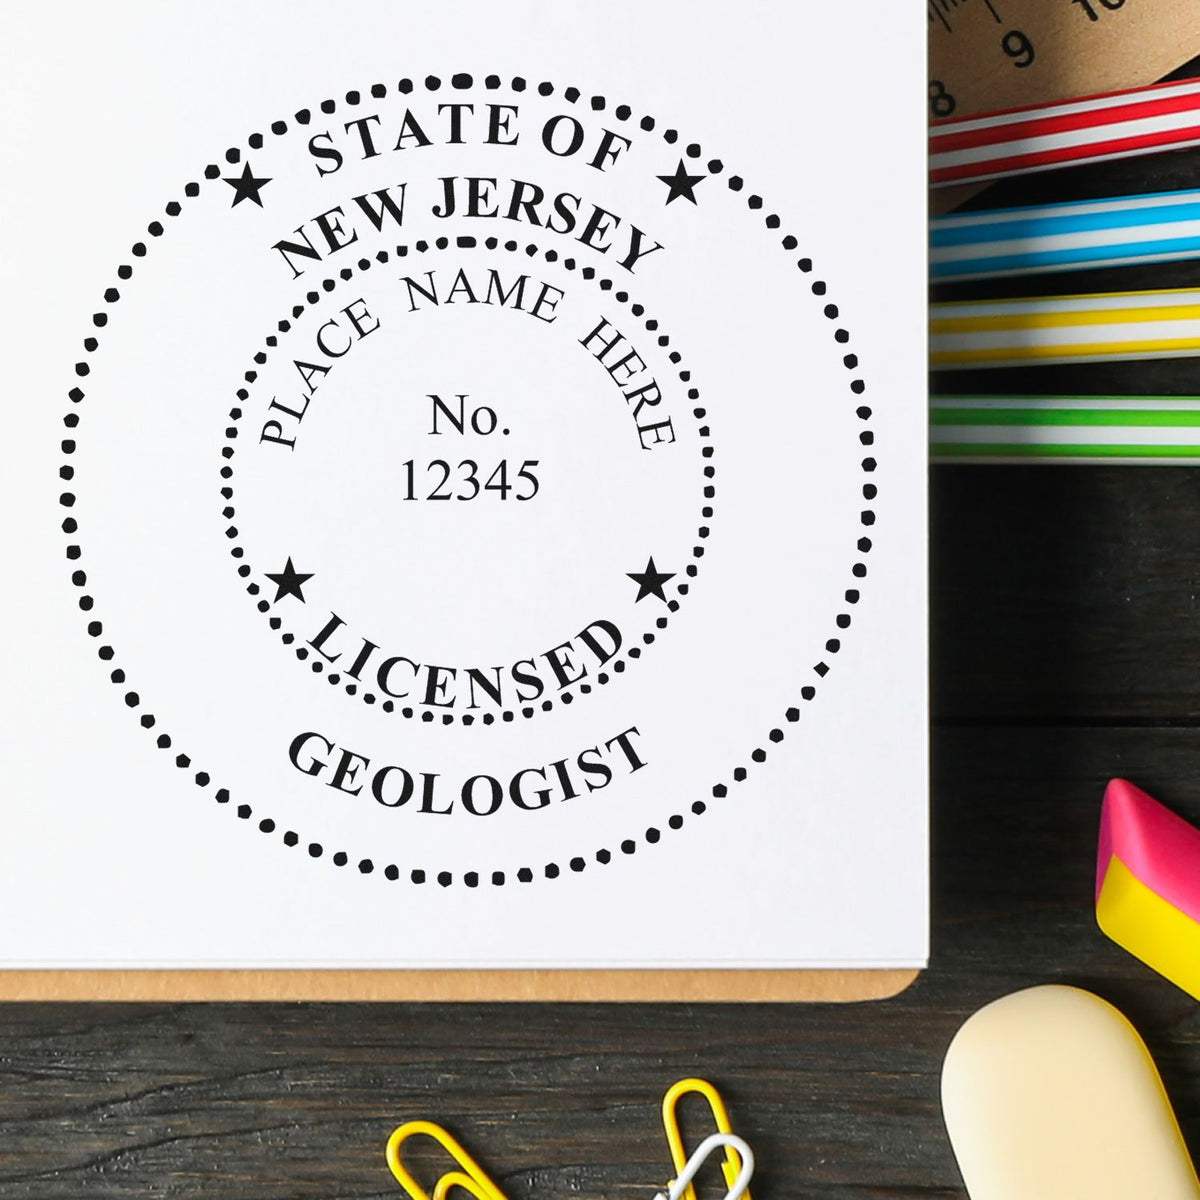 A photograph of the Slim Pre-Inked New Jersey Professional Geologist Seal Stamp stamp impression reveals a vivid, professional image of the on paper.